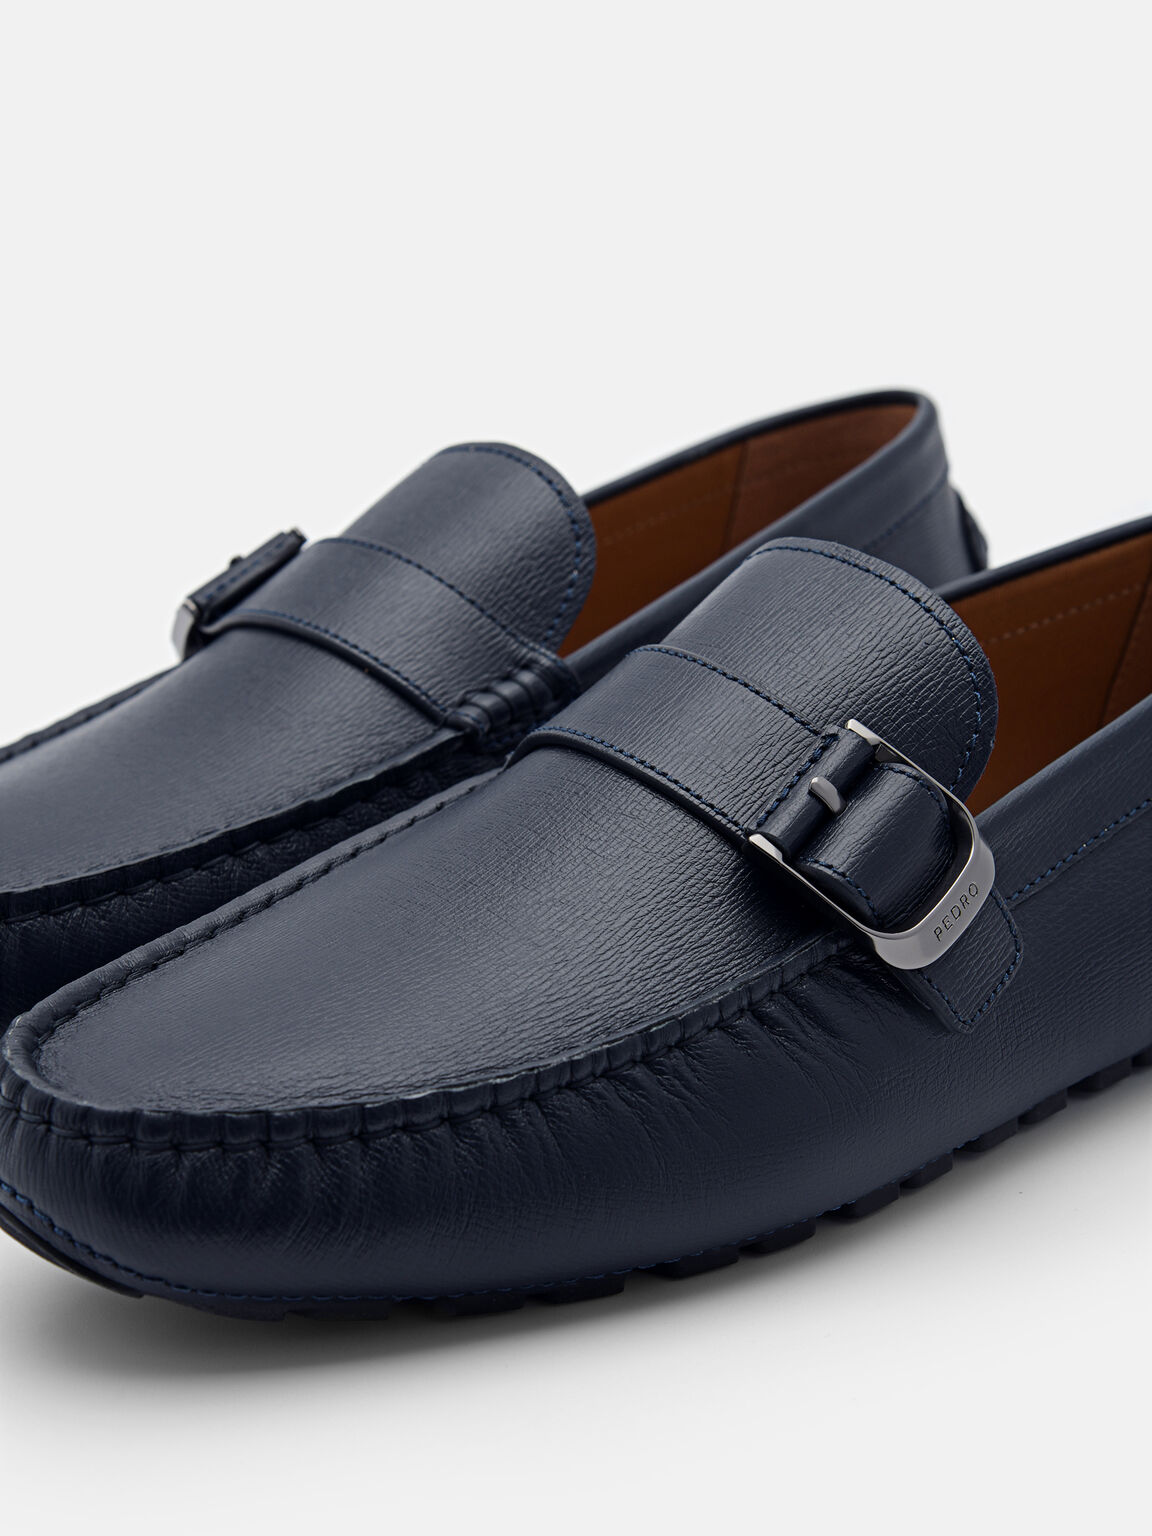 Helix Leather Moccasins, Navy